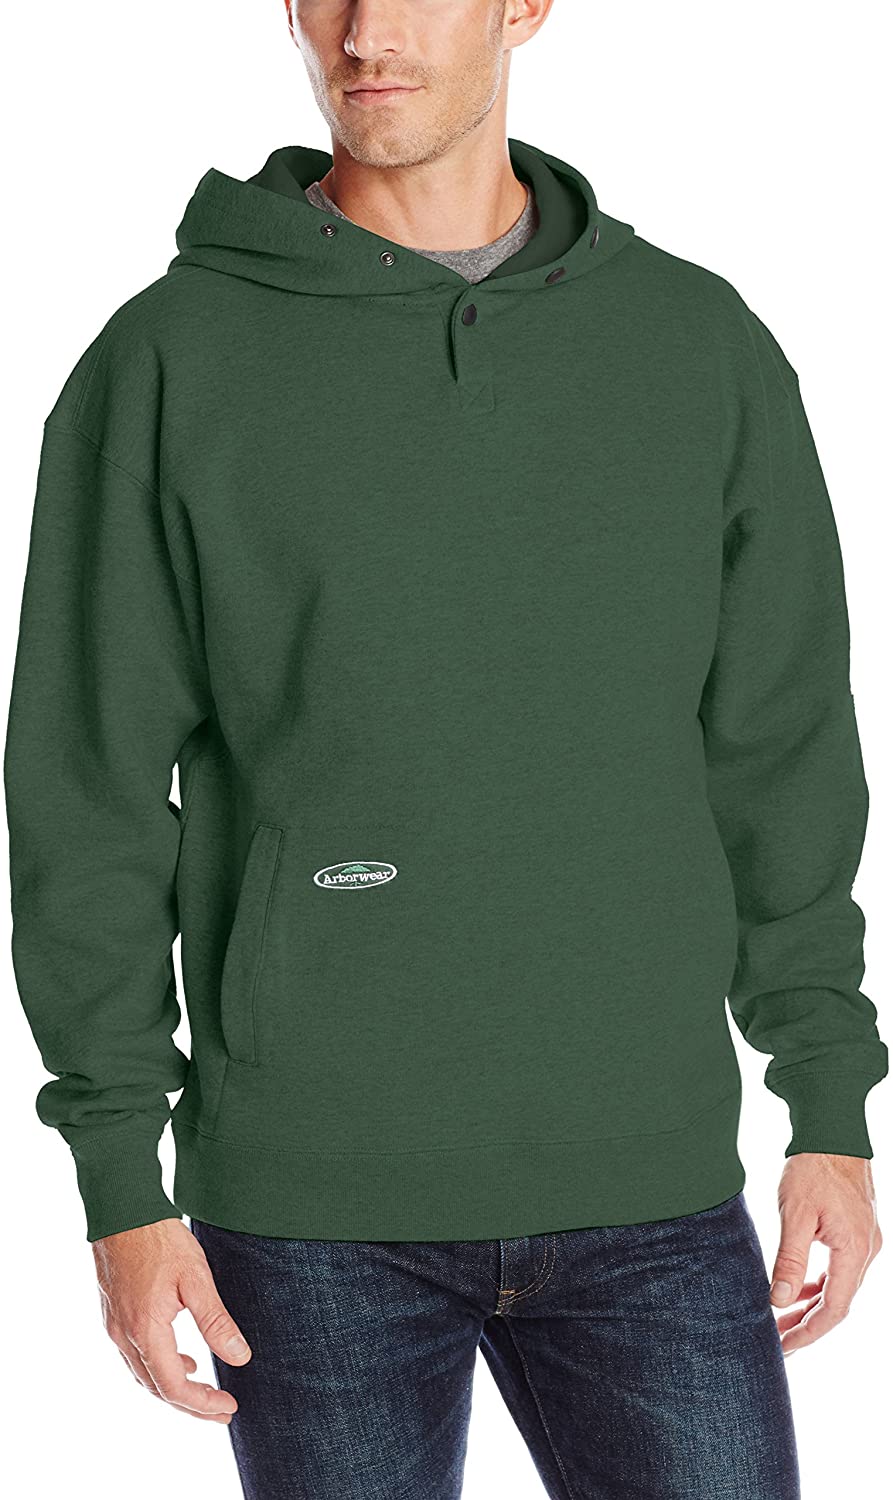 Arborwear Men's Single Thick Pullover Sweatshirt in Forest Green from the from